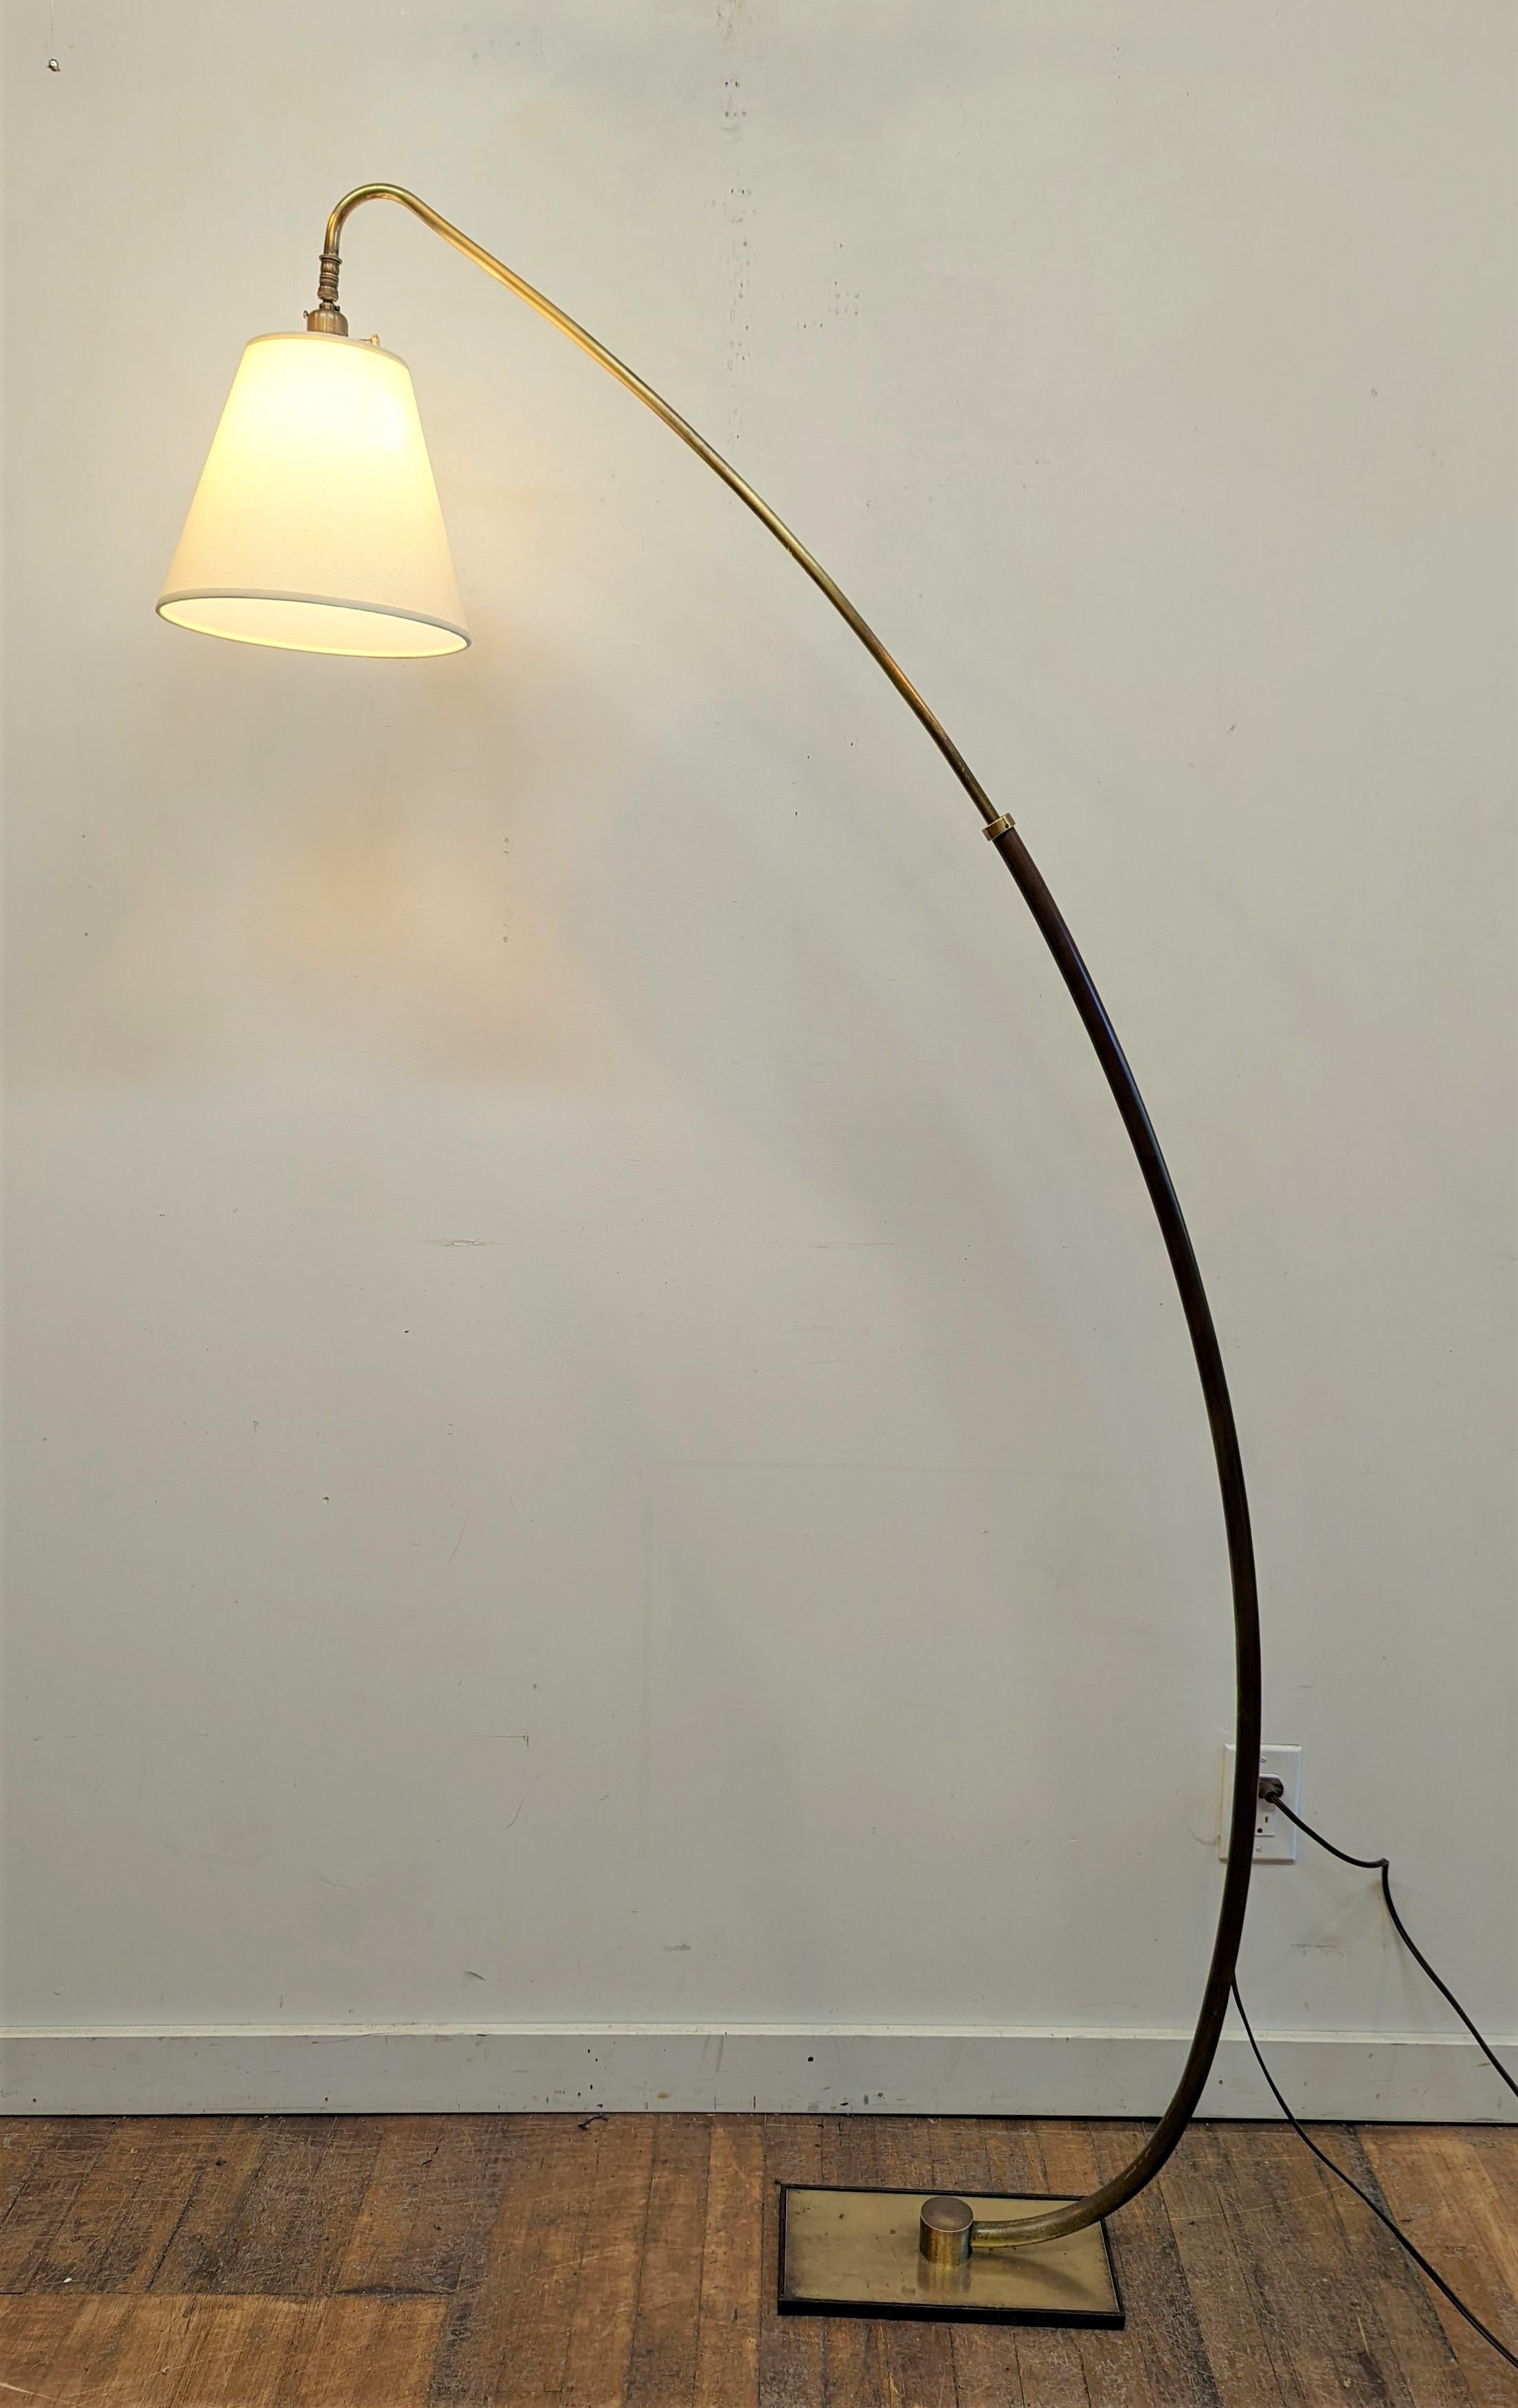 Mid-Century Modern brass articulating floor lamp. All brass arched mid century modern floor lamp with adjustable height and some Directional movement to the shade. Slide is easy and works well. Please note the sensational patina to main brass pole